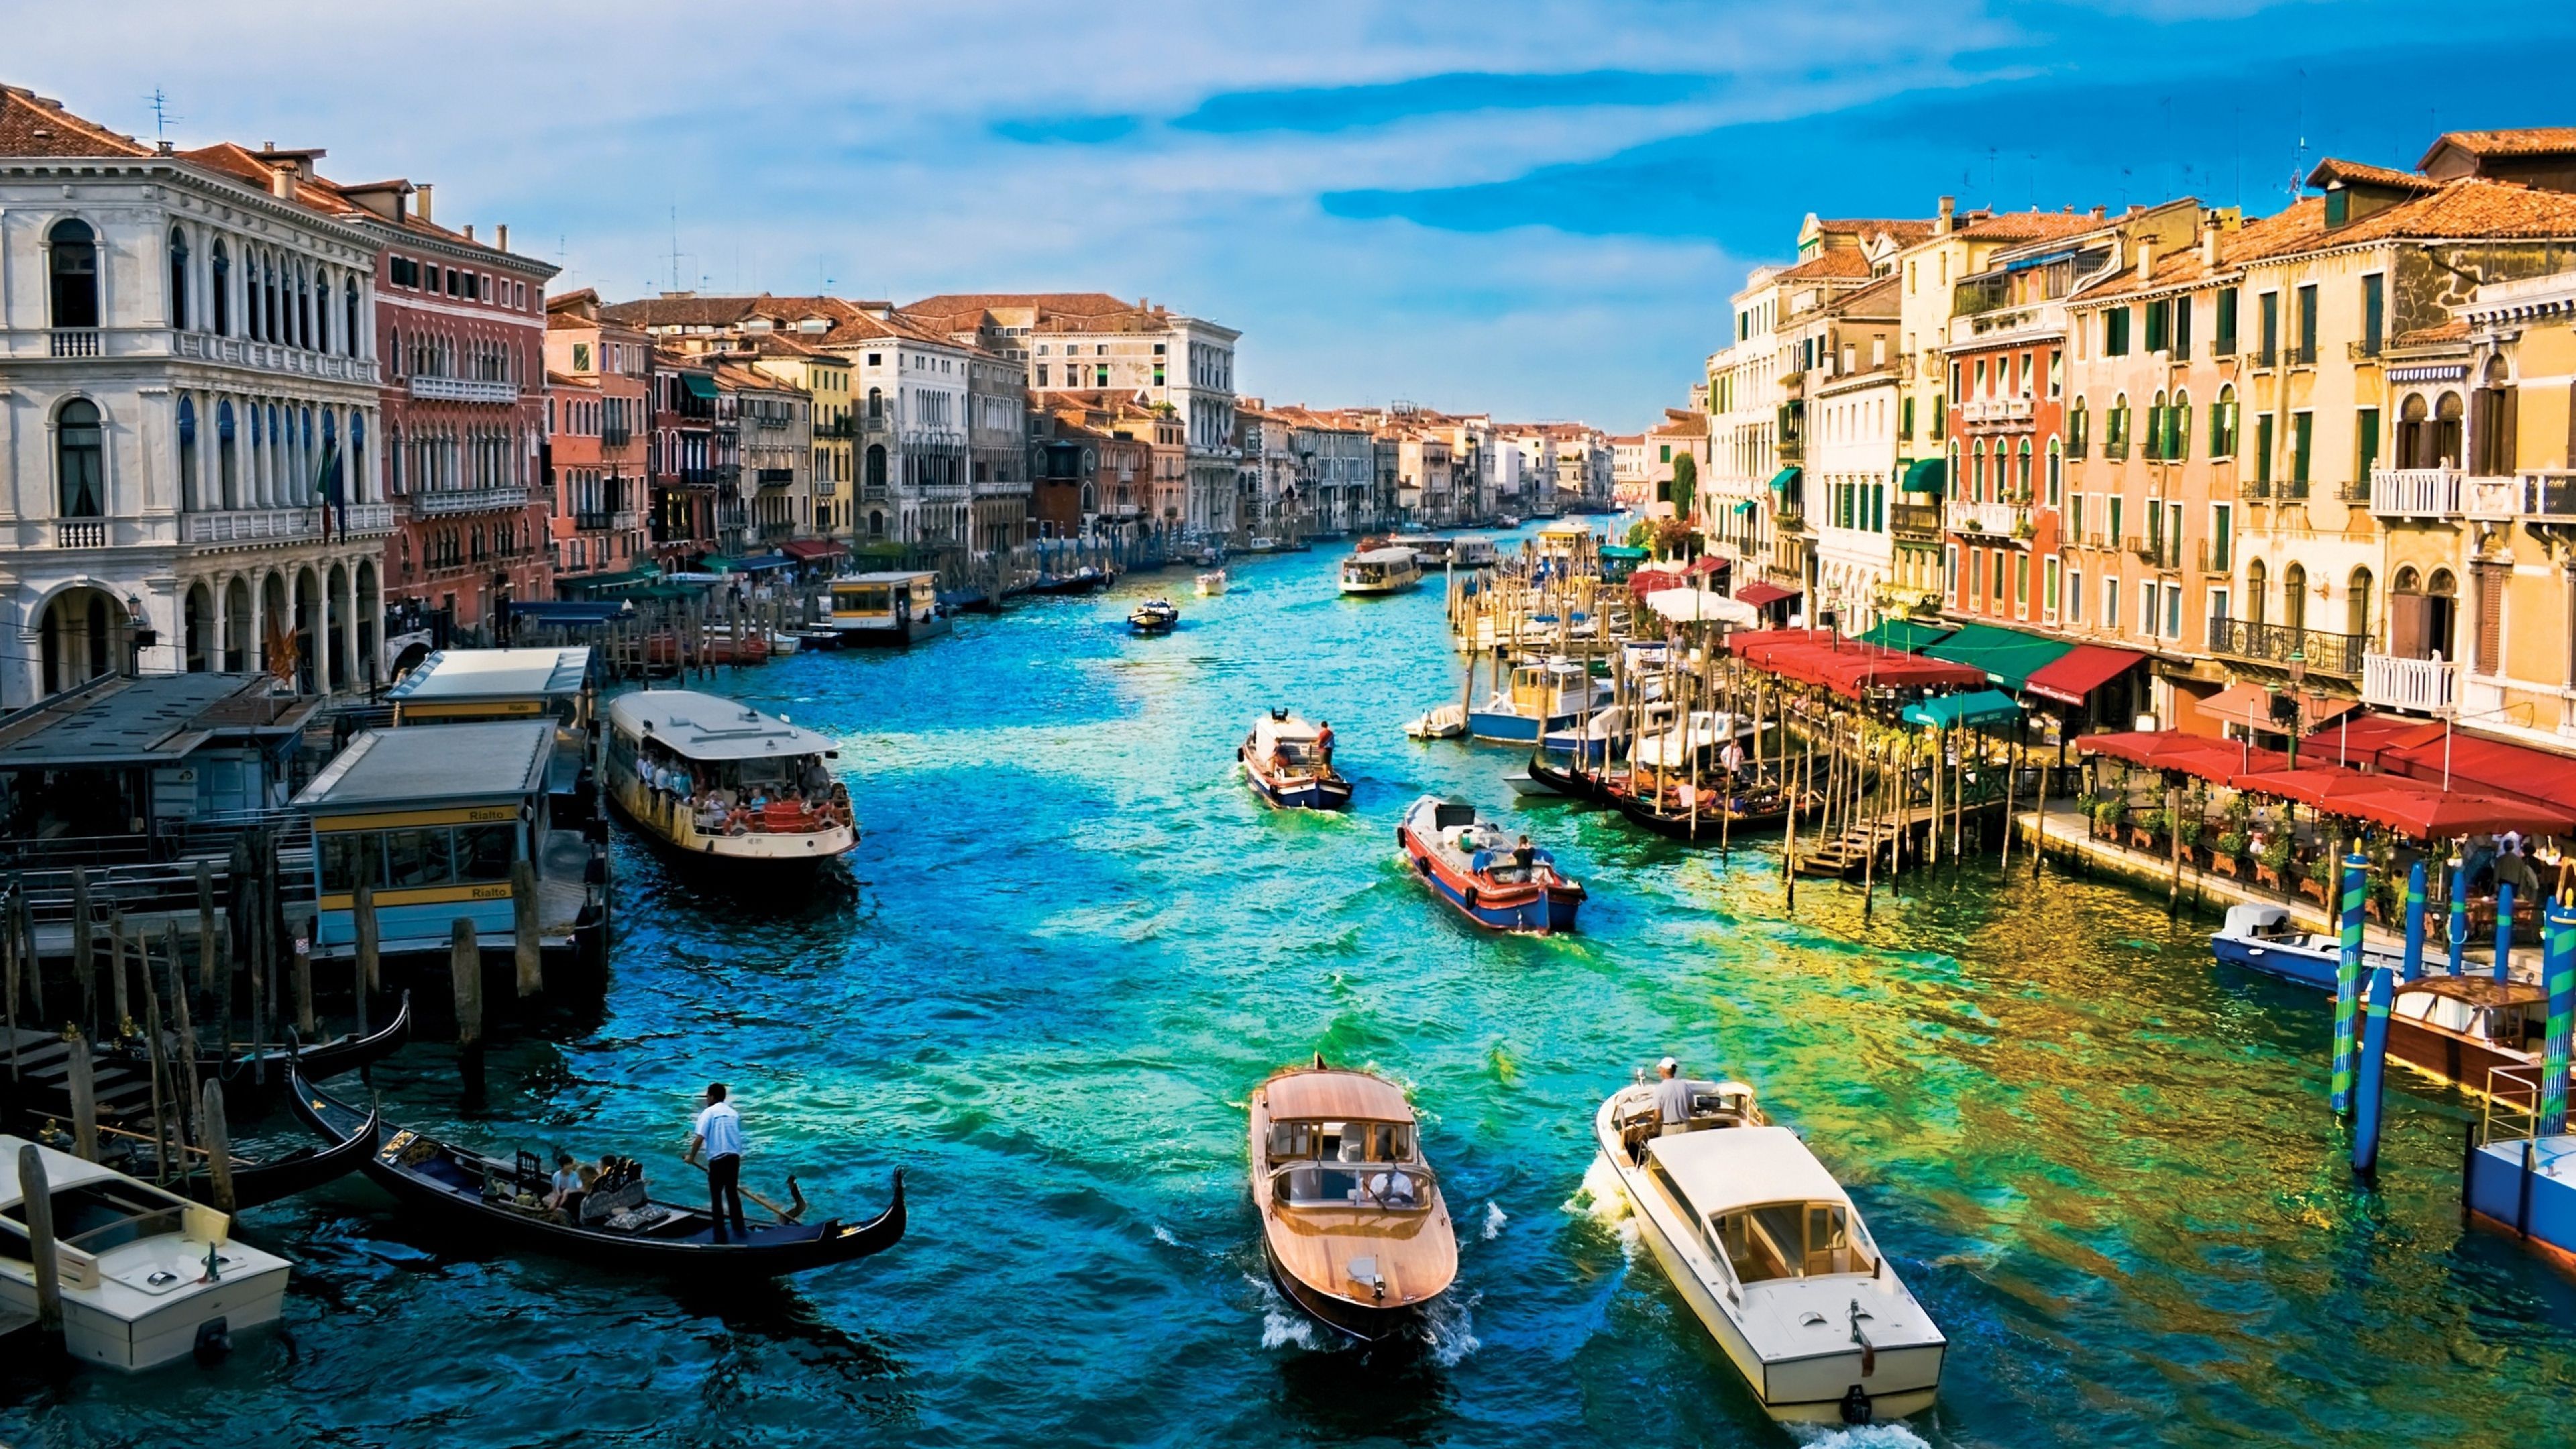 Italy full hd, hdtv, fhd, 1080p wallpapers hd, desktop backgrounds  1920x1080, images and pictures